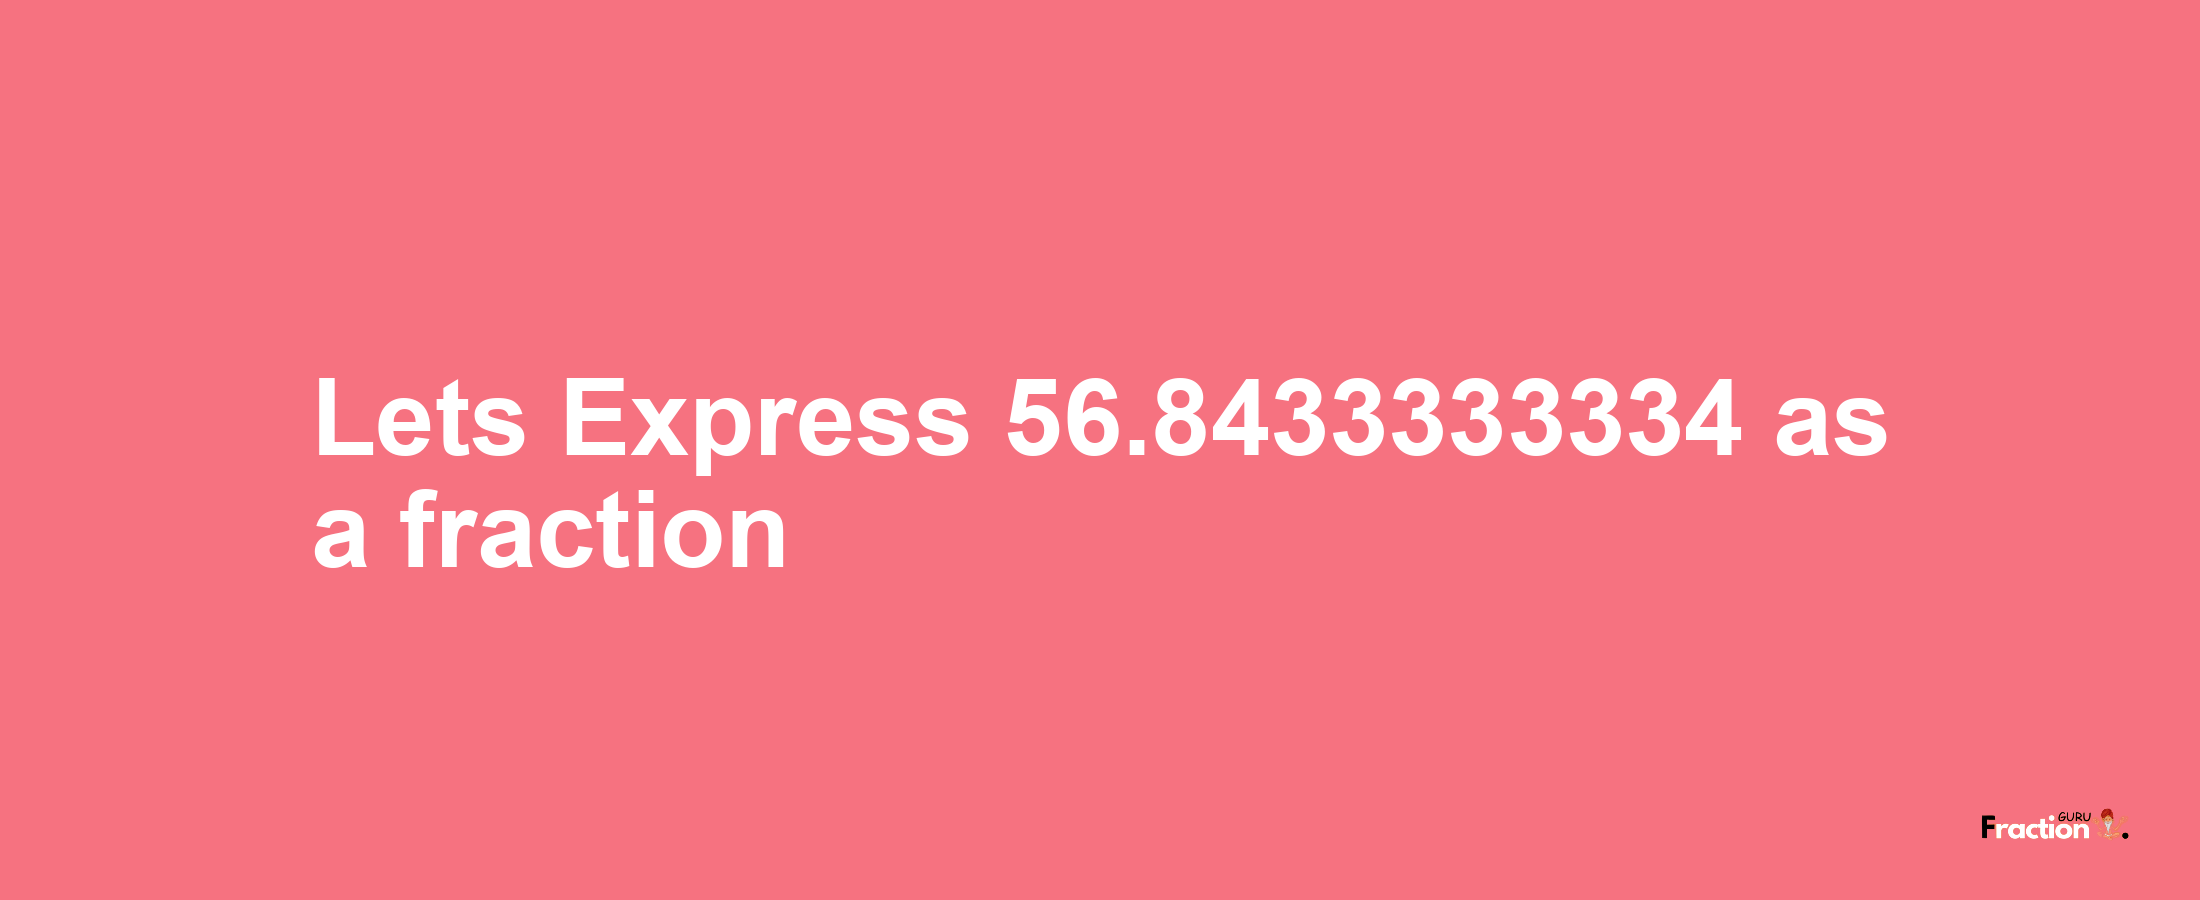 Lets Express 56.8433333334 as afraction